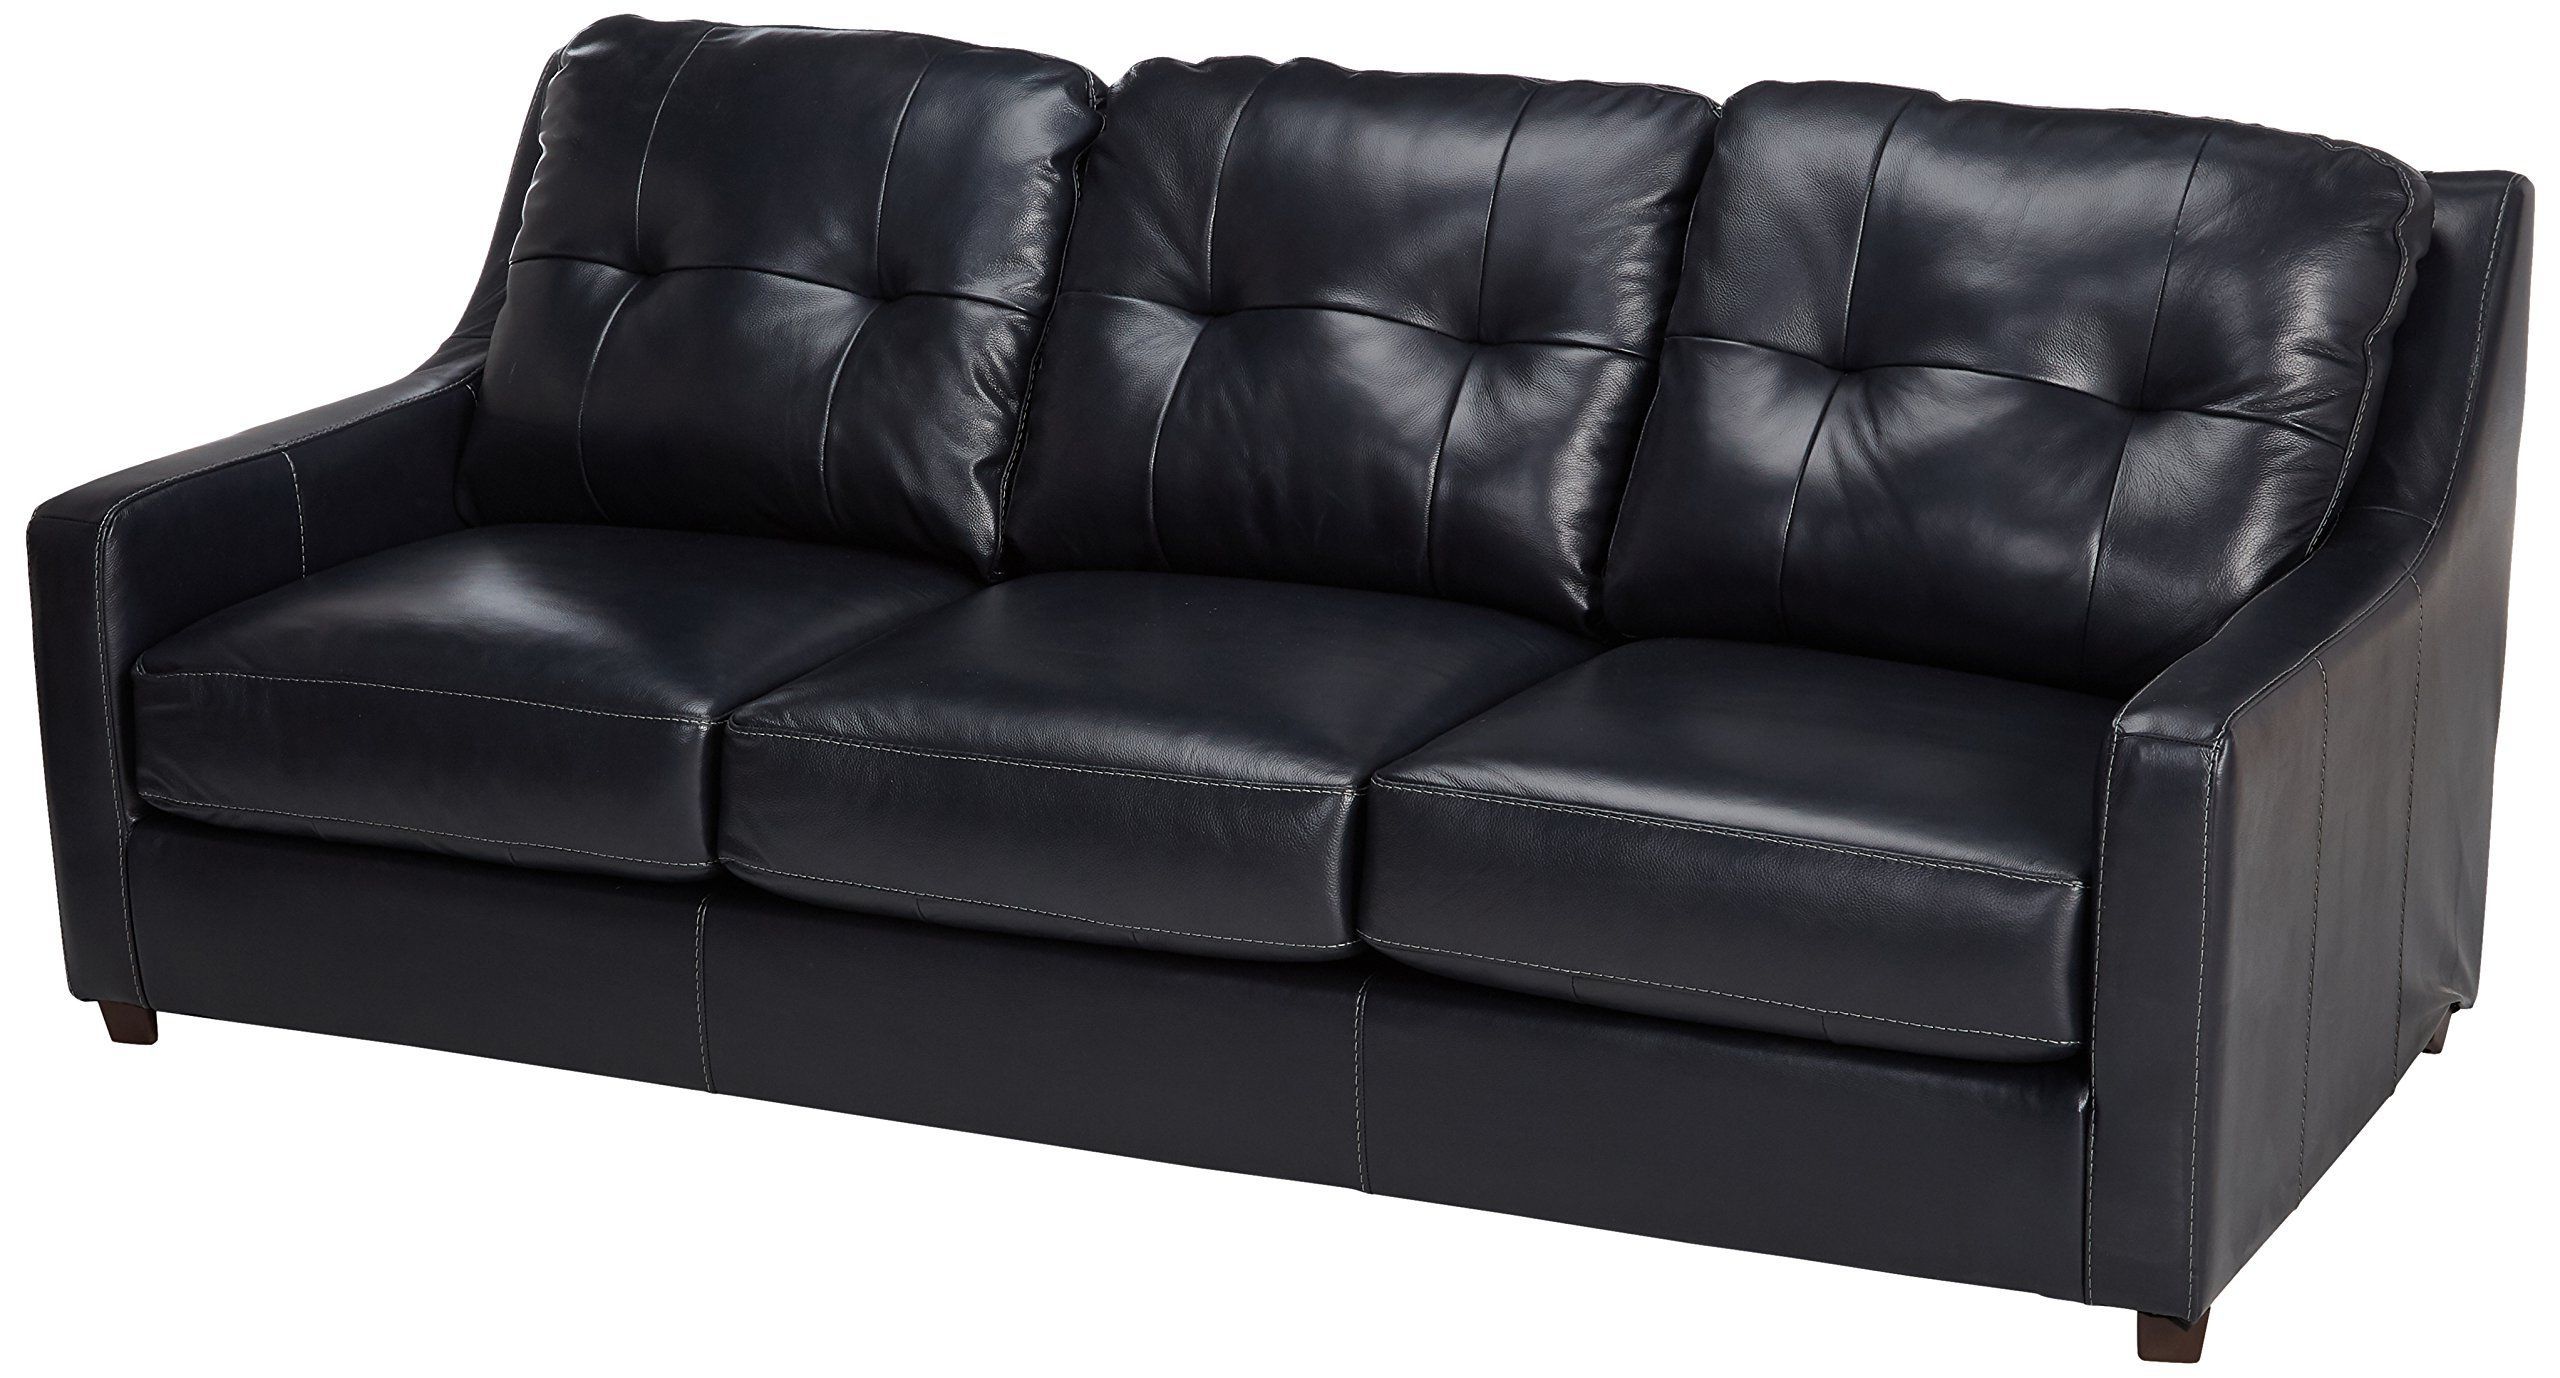 Navy Sleeper Sofa Couches Inside Best And Newest Ashley Furniture Signature Design Okean Upholstered Leather Queen (View 5 of 15)